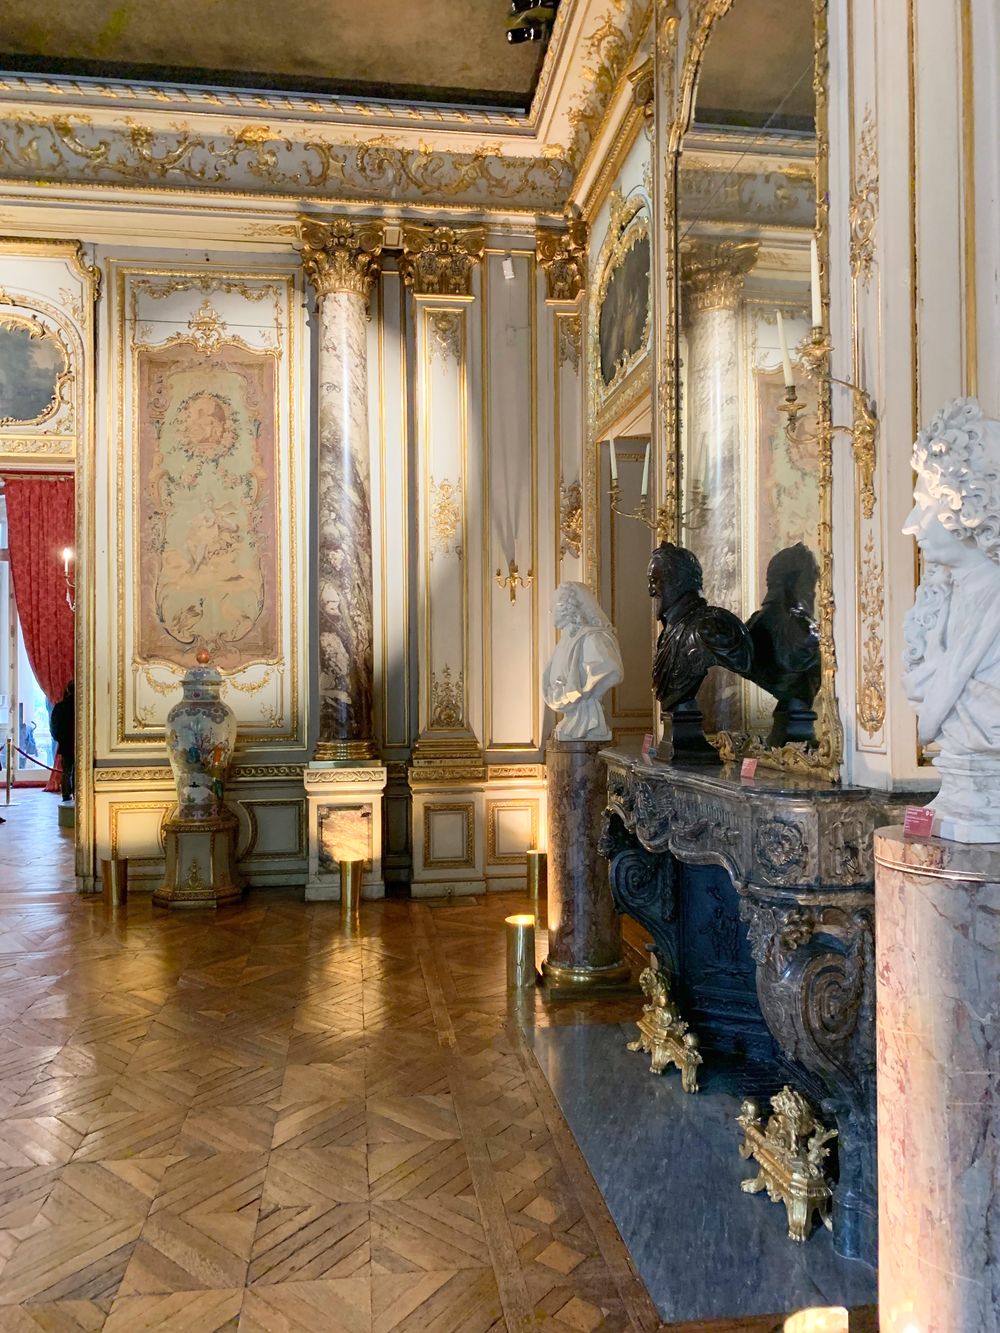 Marble reception room at the Jacquemart-André Museum